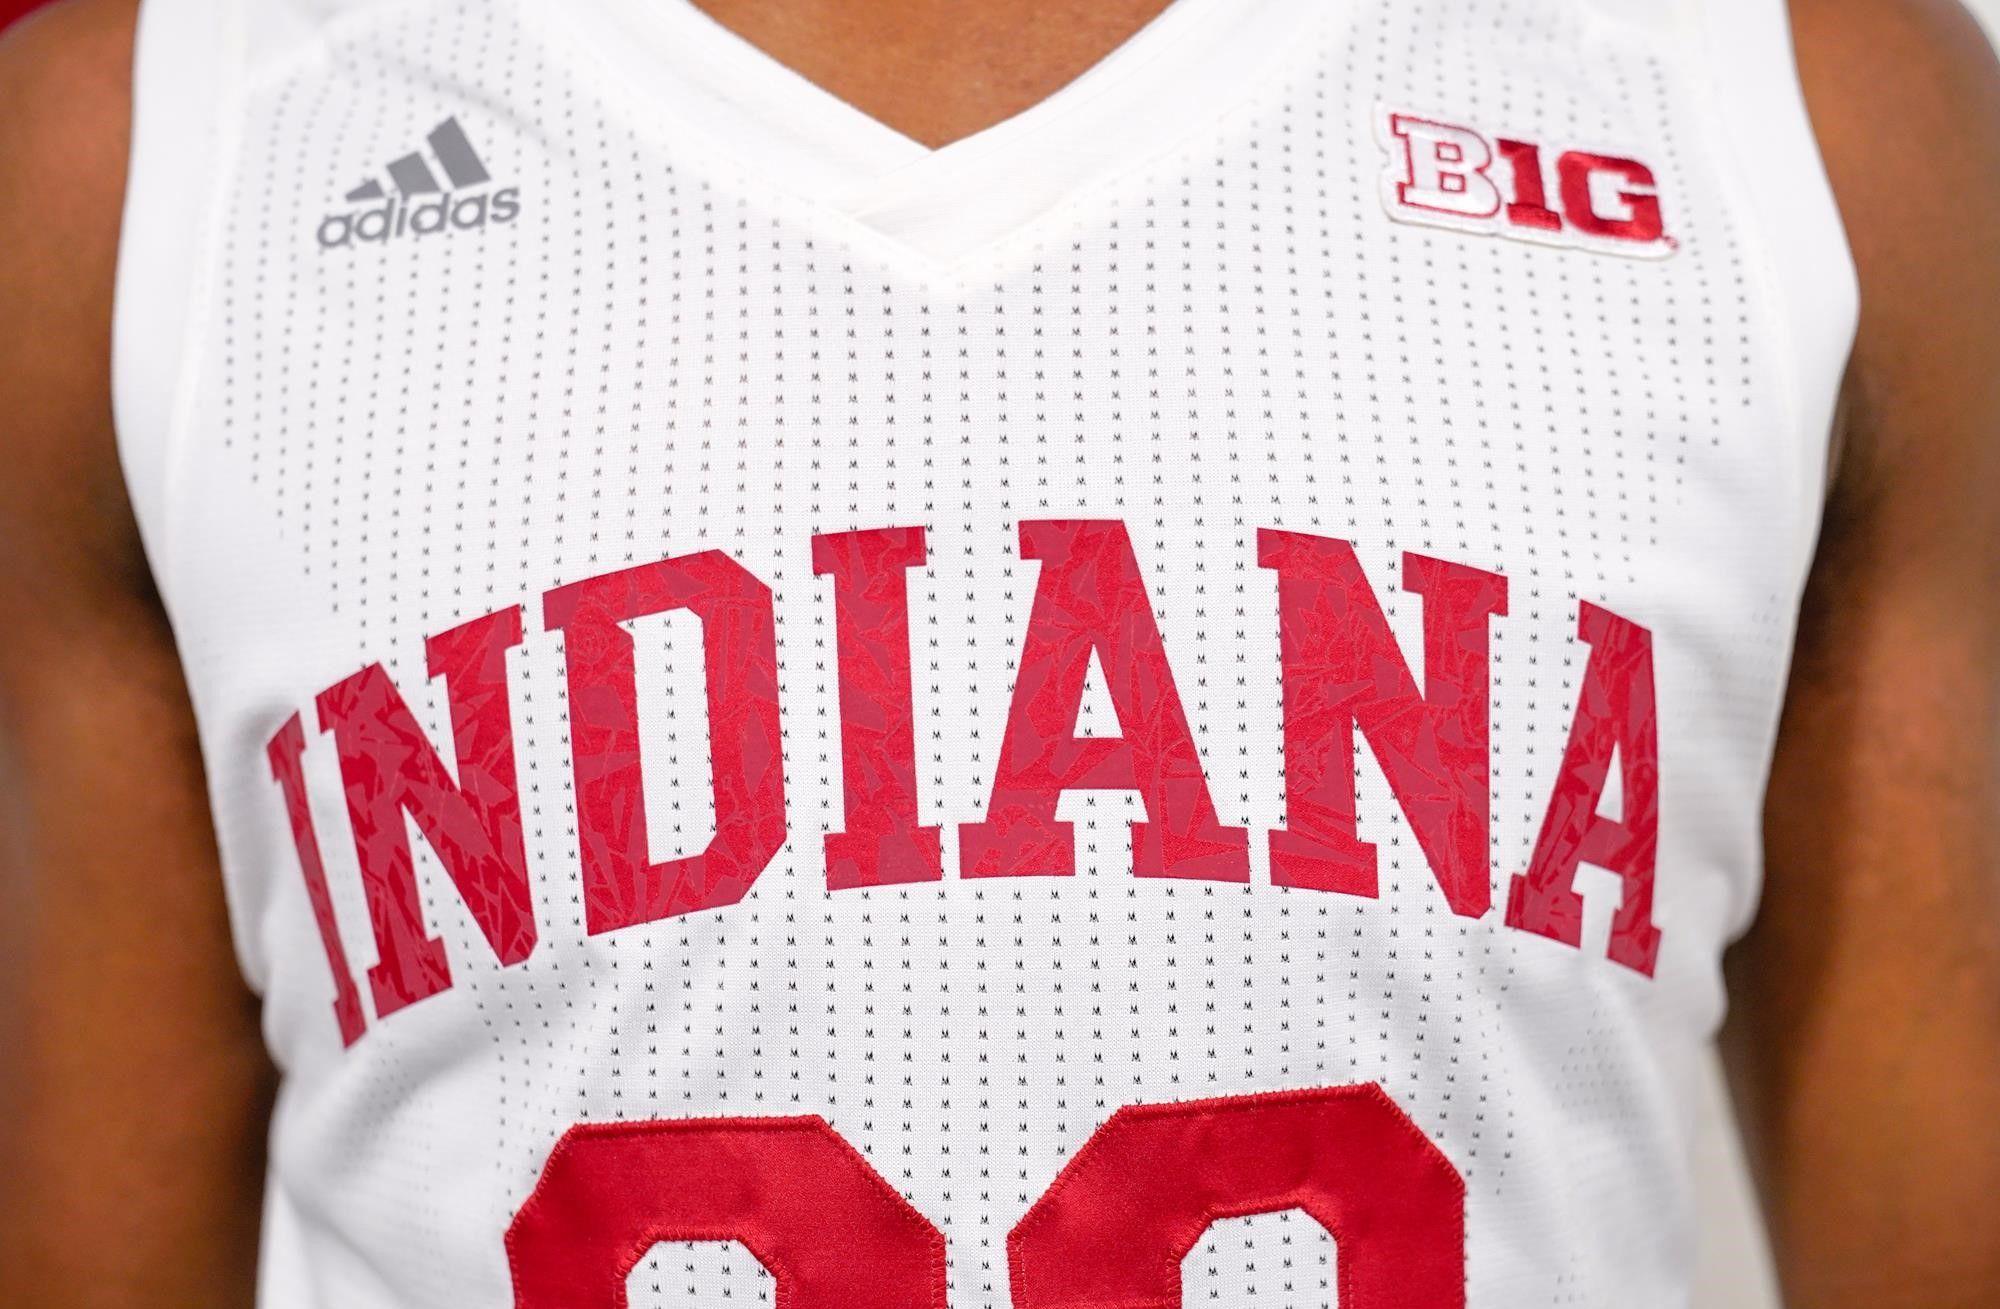 Indiana Hoosiers Basketball Logo - Game Time Approaches For Indiana Hoosiers University Athletics